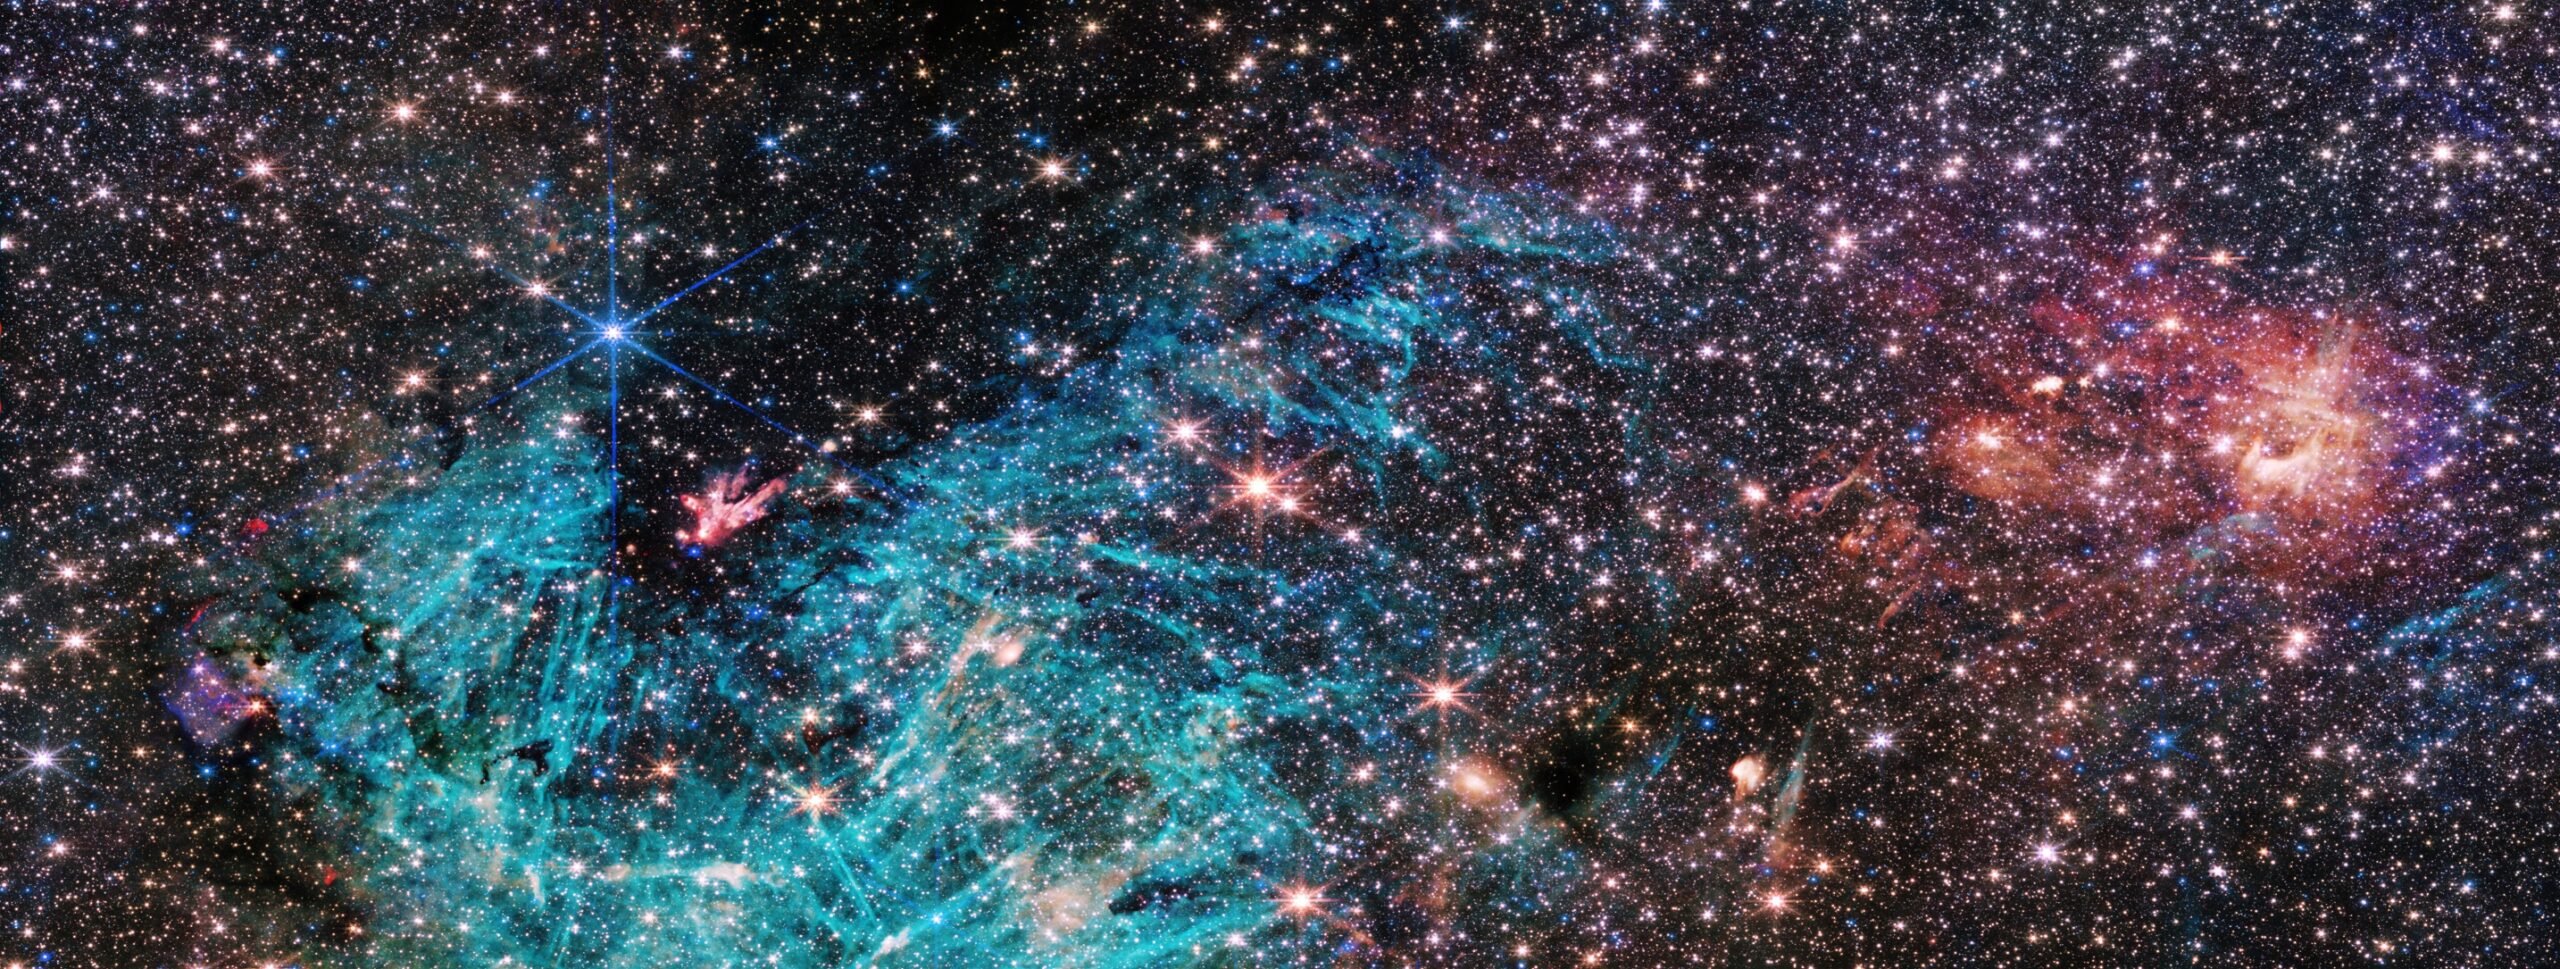 webb space telescope view of a star-forming region near the center of the milky way